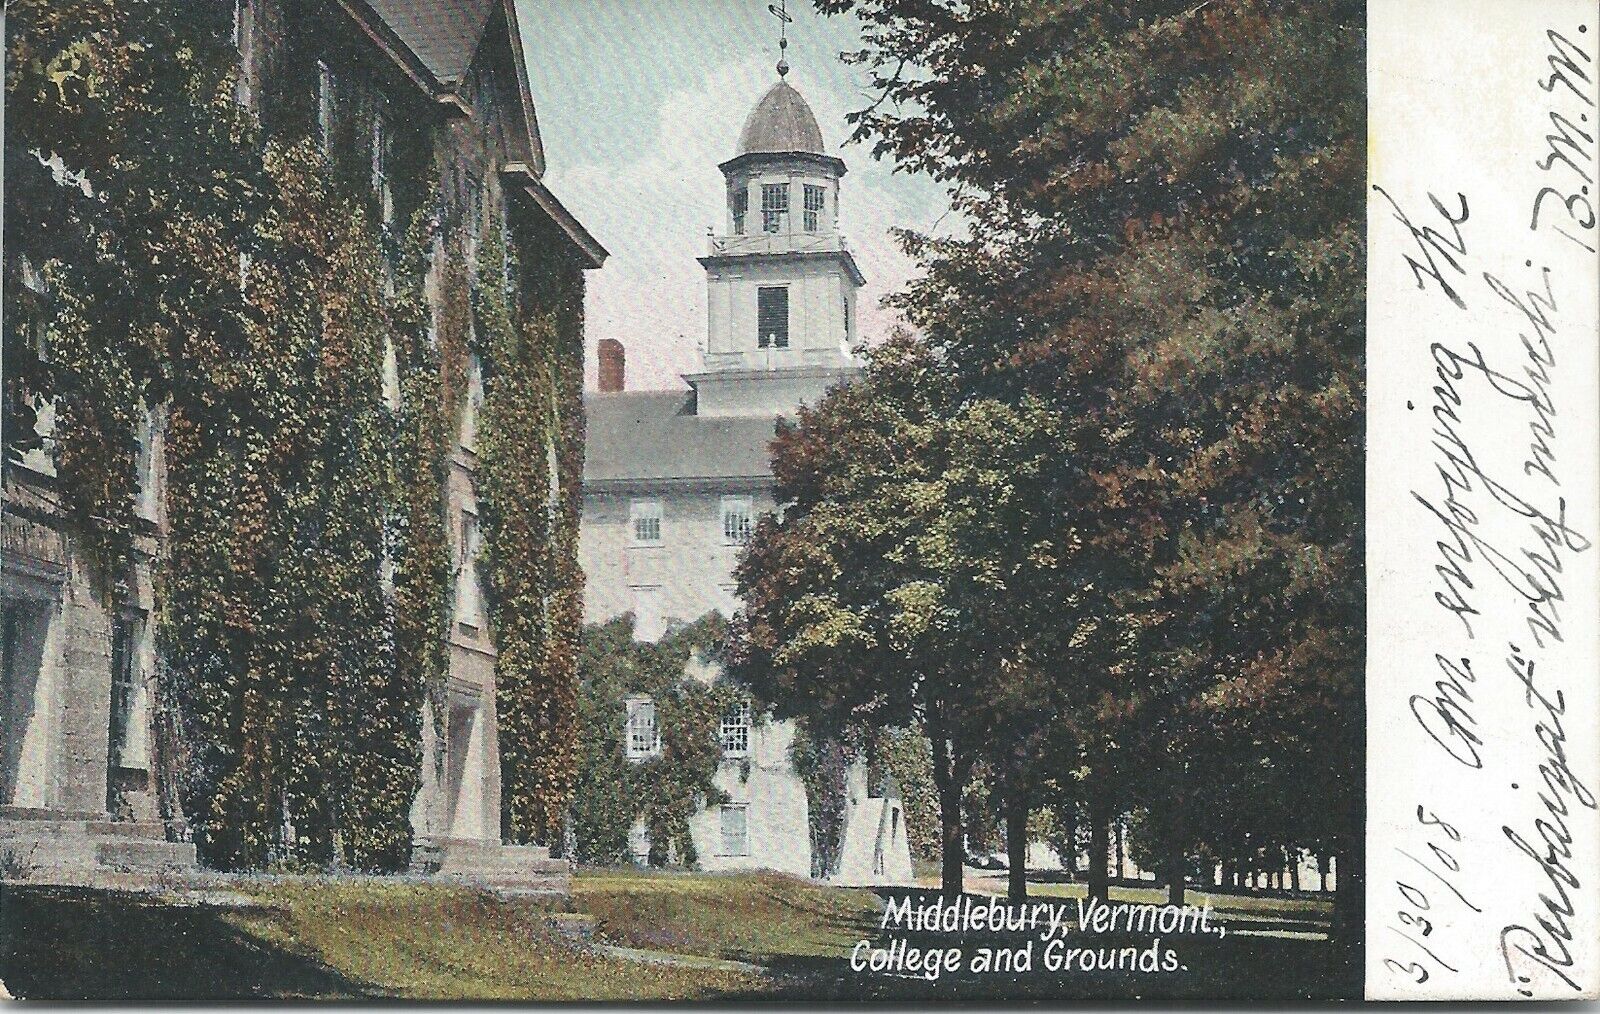 College and Grounds, Middlebury, Vermont, early postcard, used in 1908